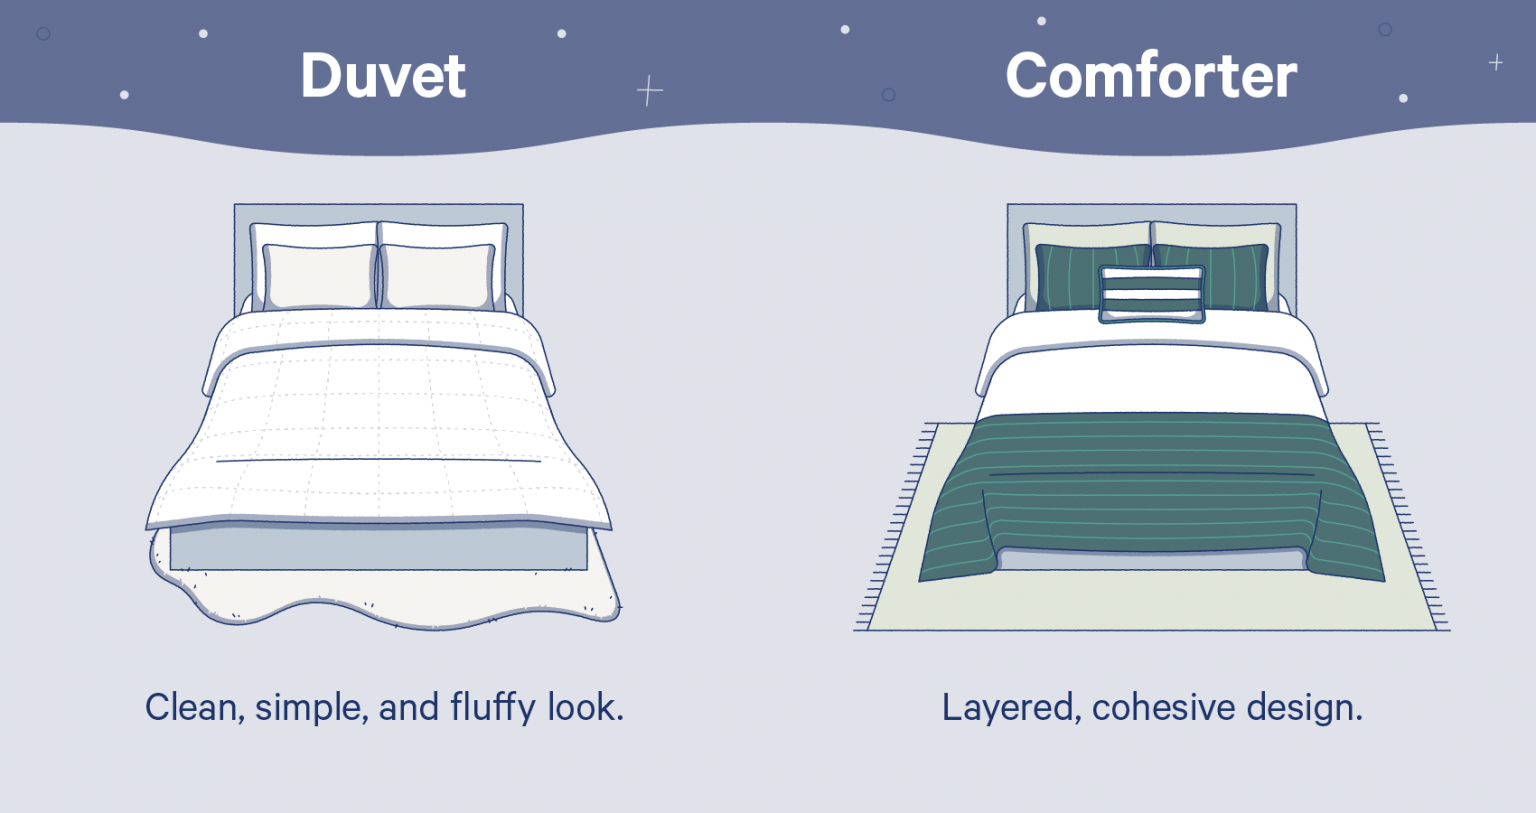 The main difference between a duvet and a comforter